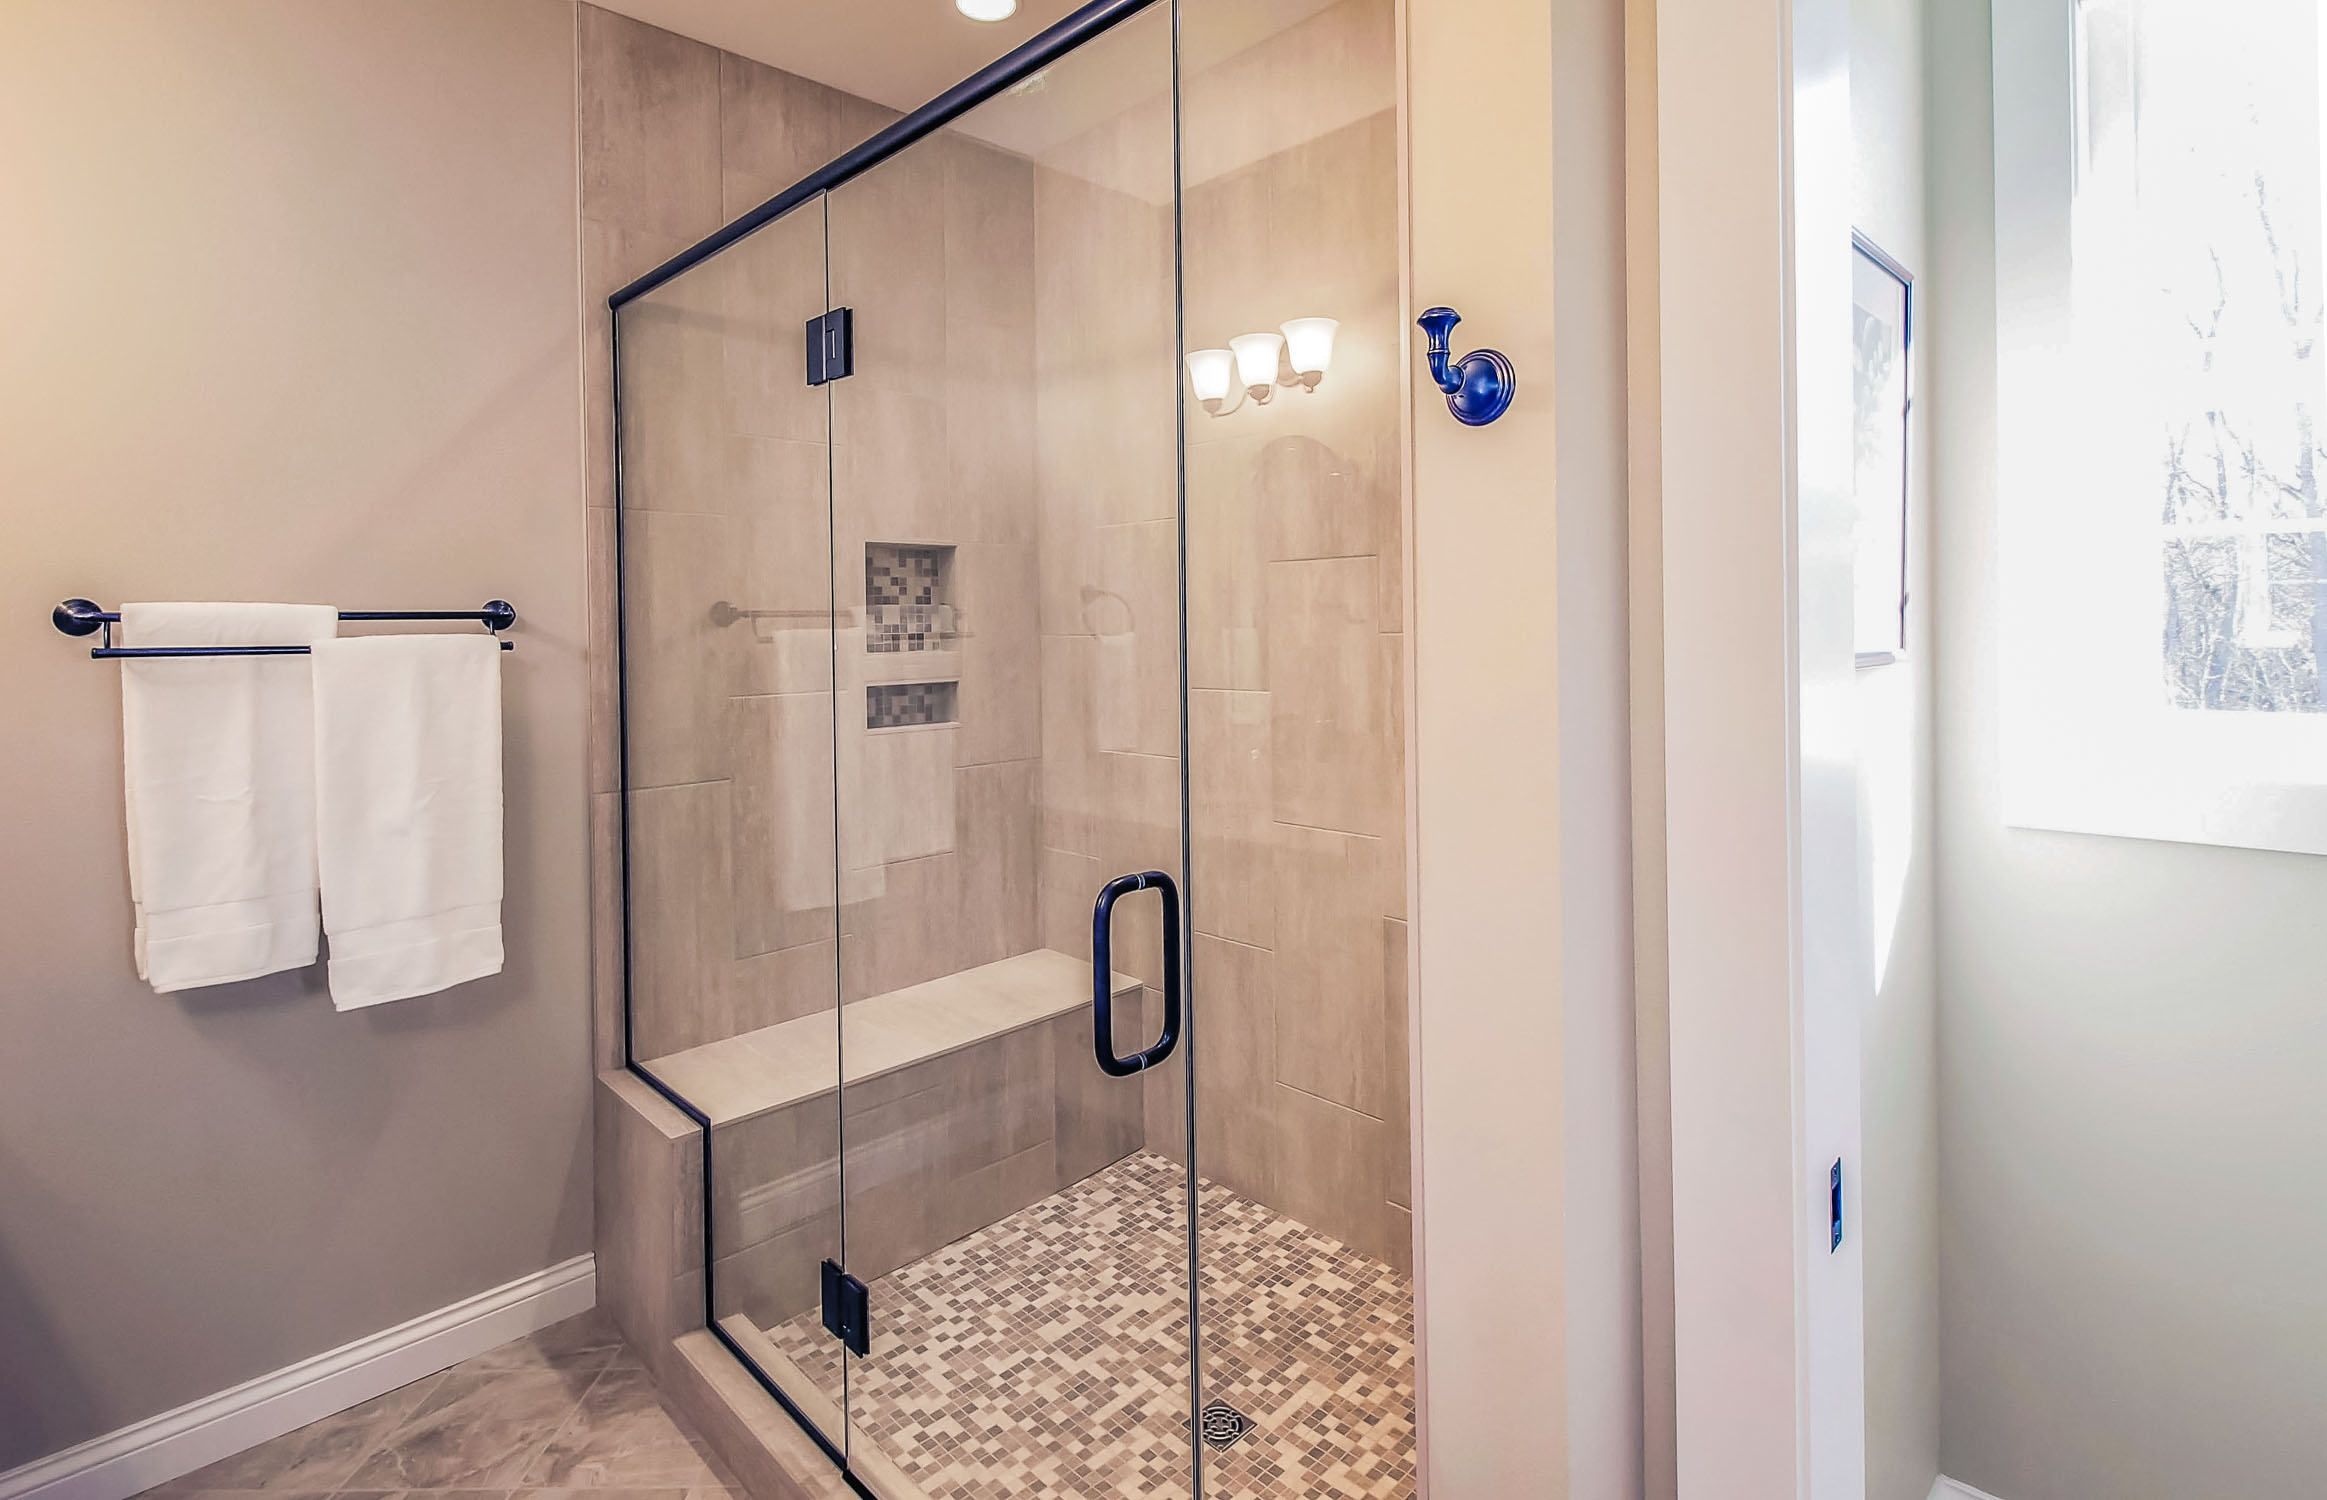 How to Find the Best Tub to Shower Conversions Online